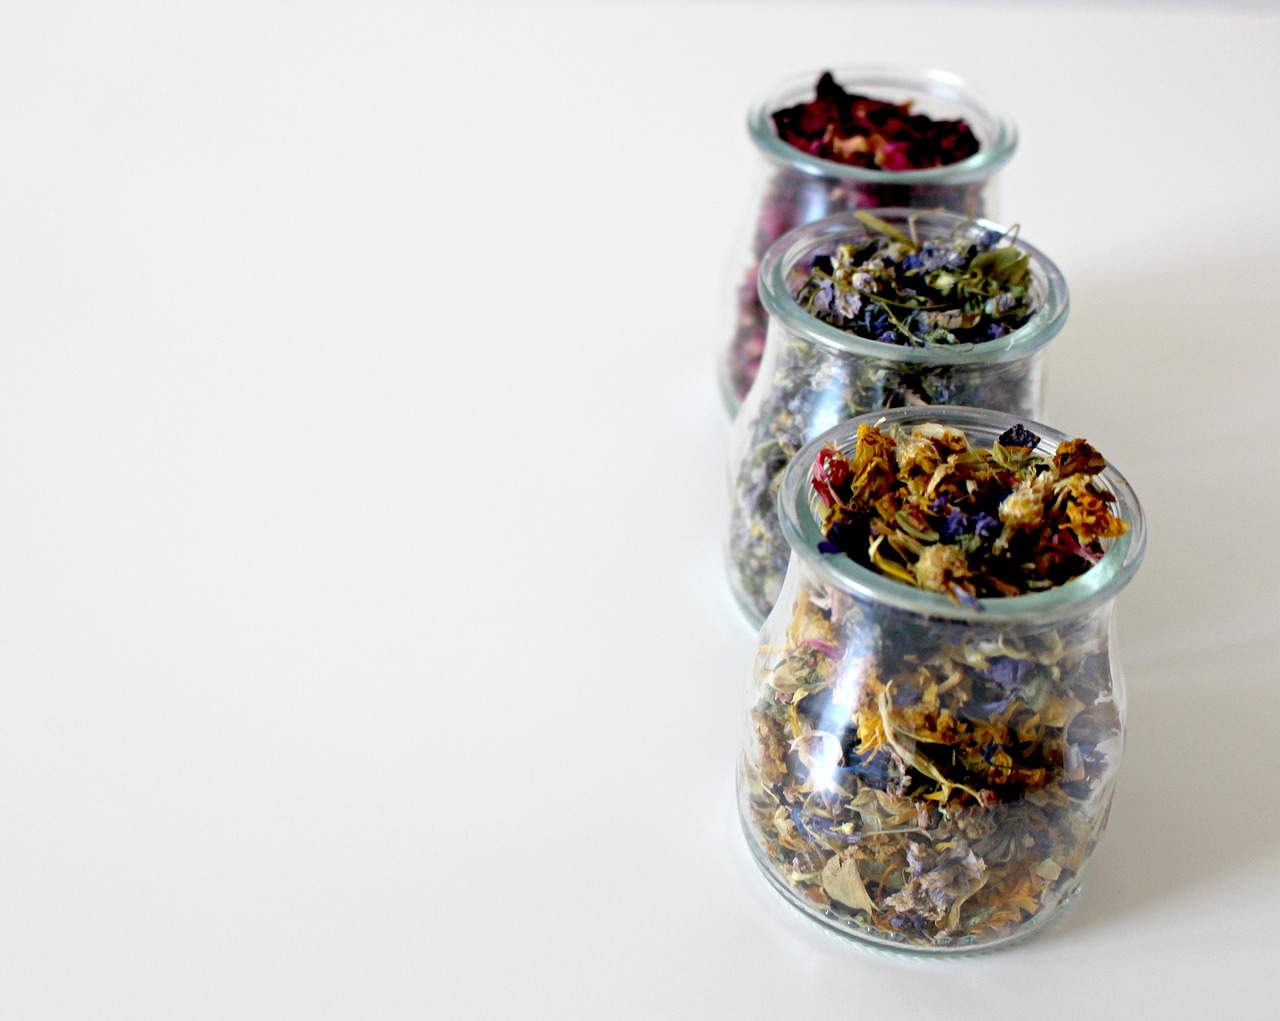 three glass jars filled with dried flowers on a white surface, a picture, high quality product photo, teapots, high res photo, with beautiful colors